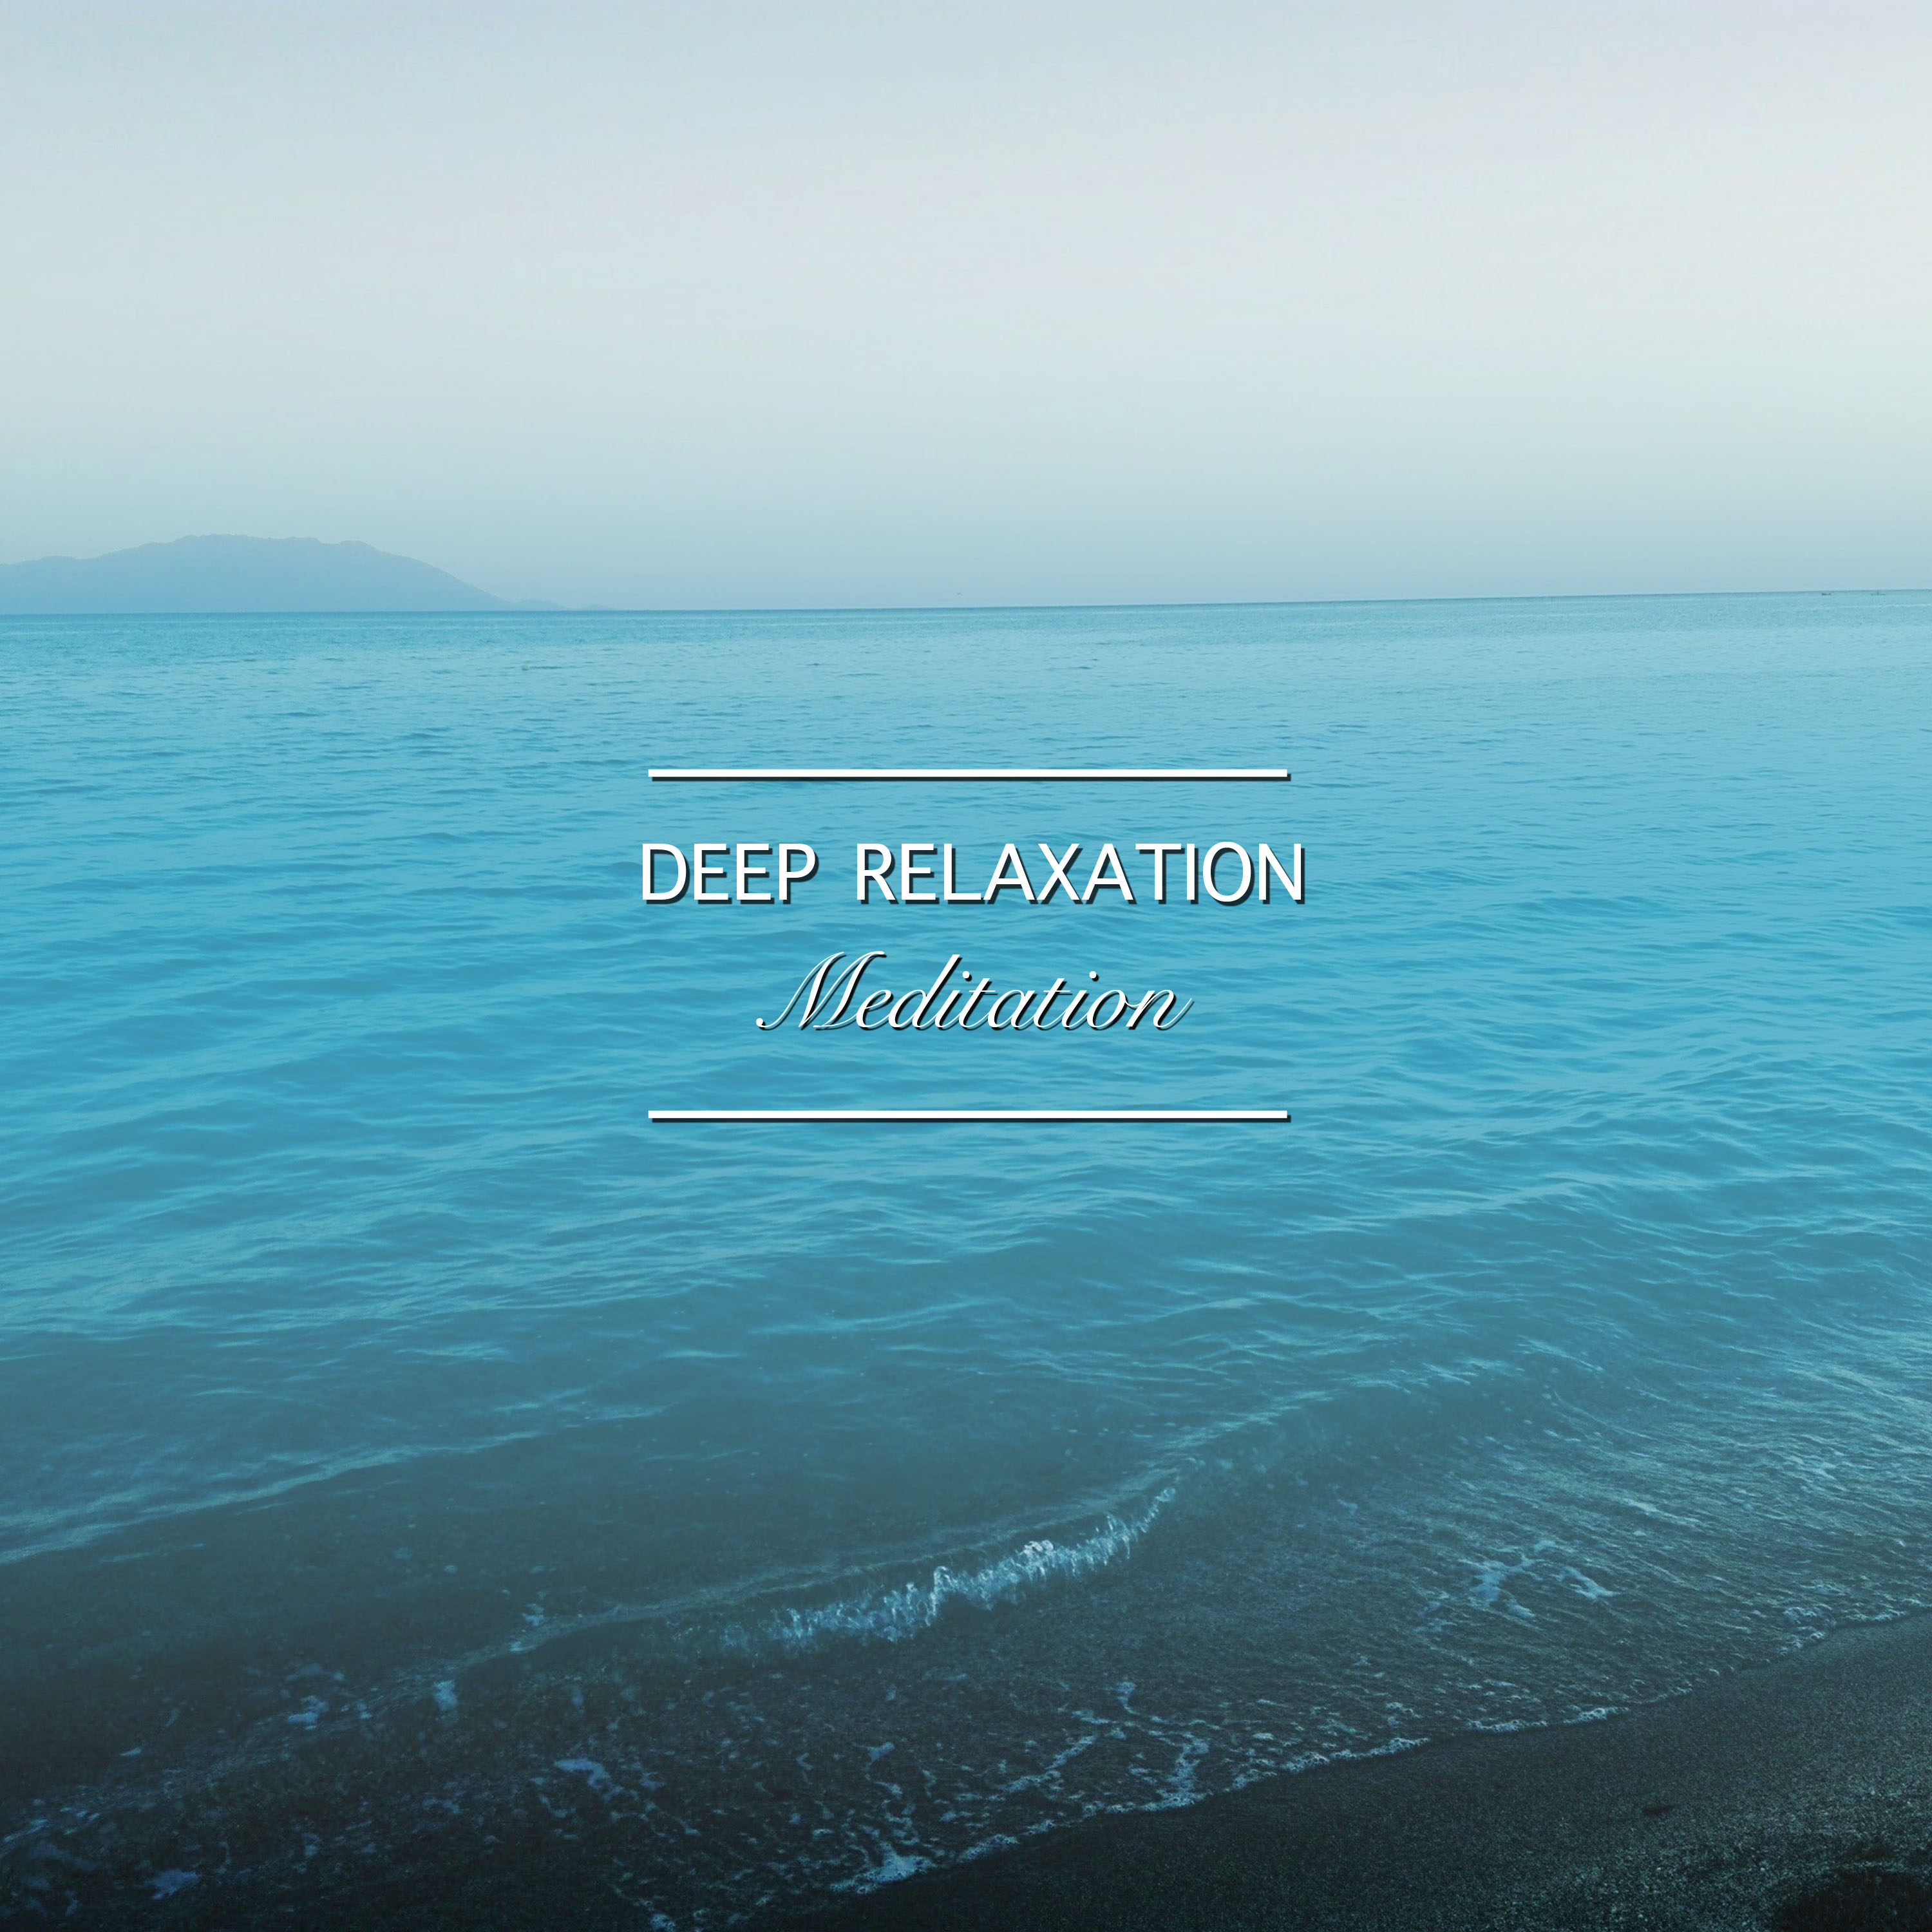 Absolute Peaceful Combo - 30 Powerful Songs That Provide Deep Relaxing Stress Relief